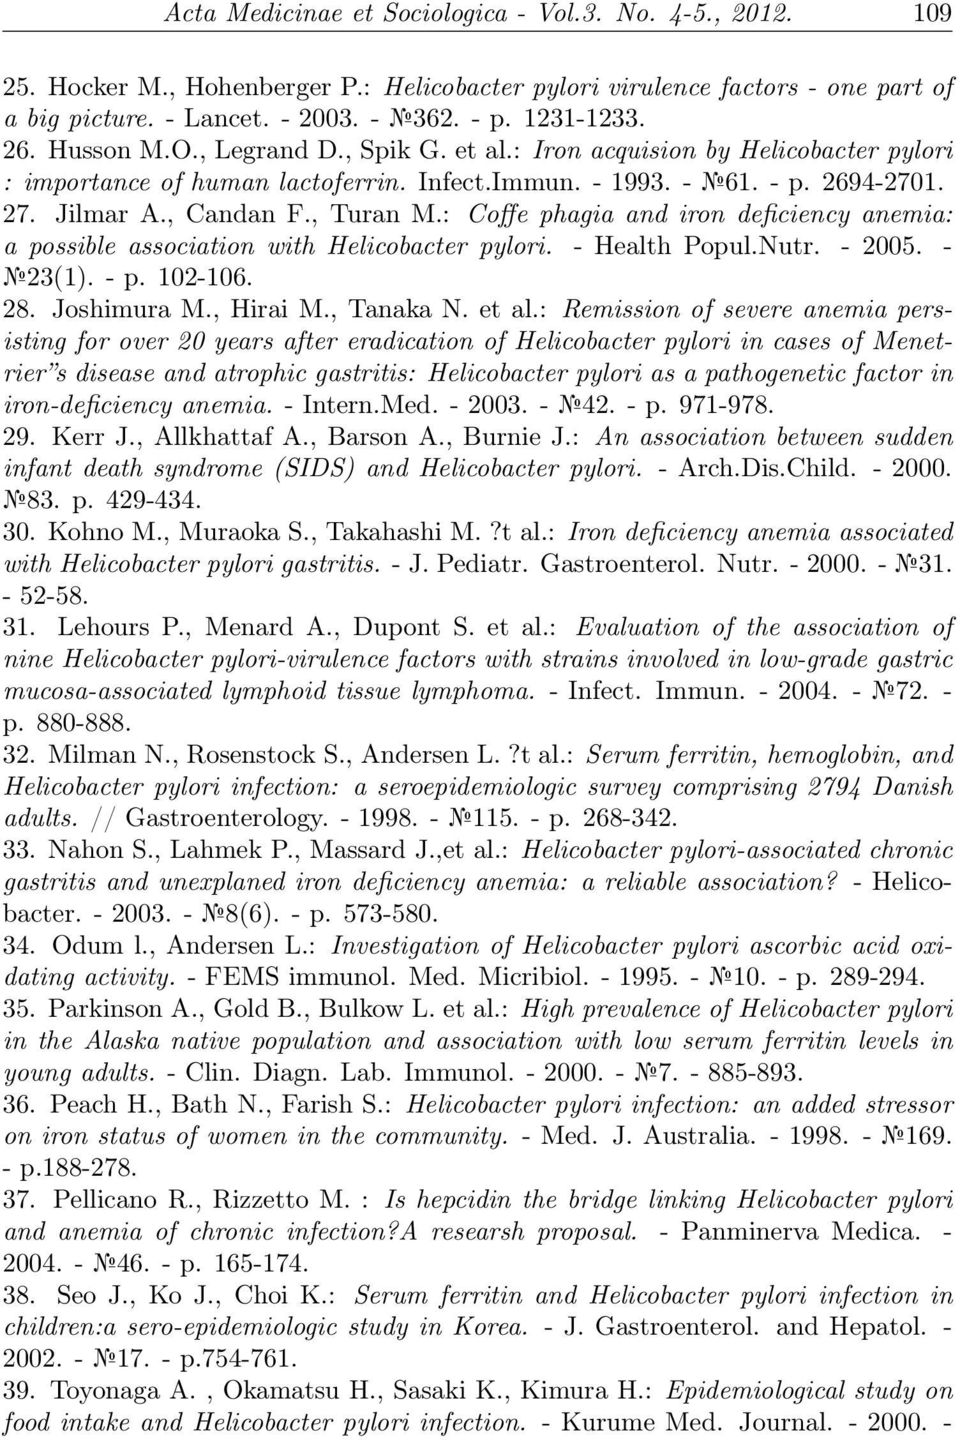 : Coffe phagia and iron deficiency anemia: a possible association with Helicobacter pylori. - Health Popul.Nutr. - 2005. - 23(1). - p. 102-106. 28. Joshimura M., Hirai M., Tanaka N. et al.